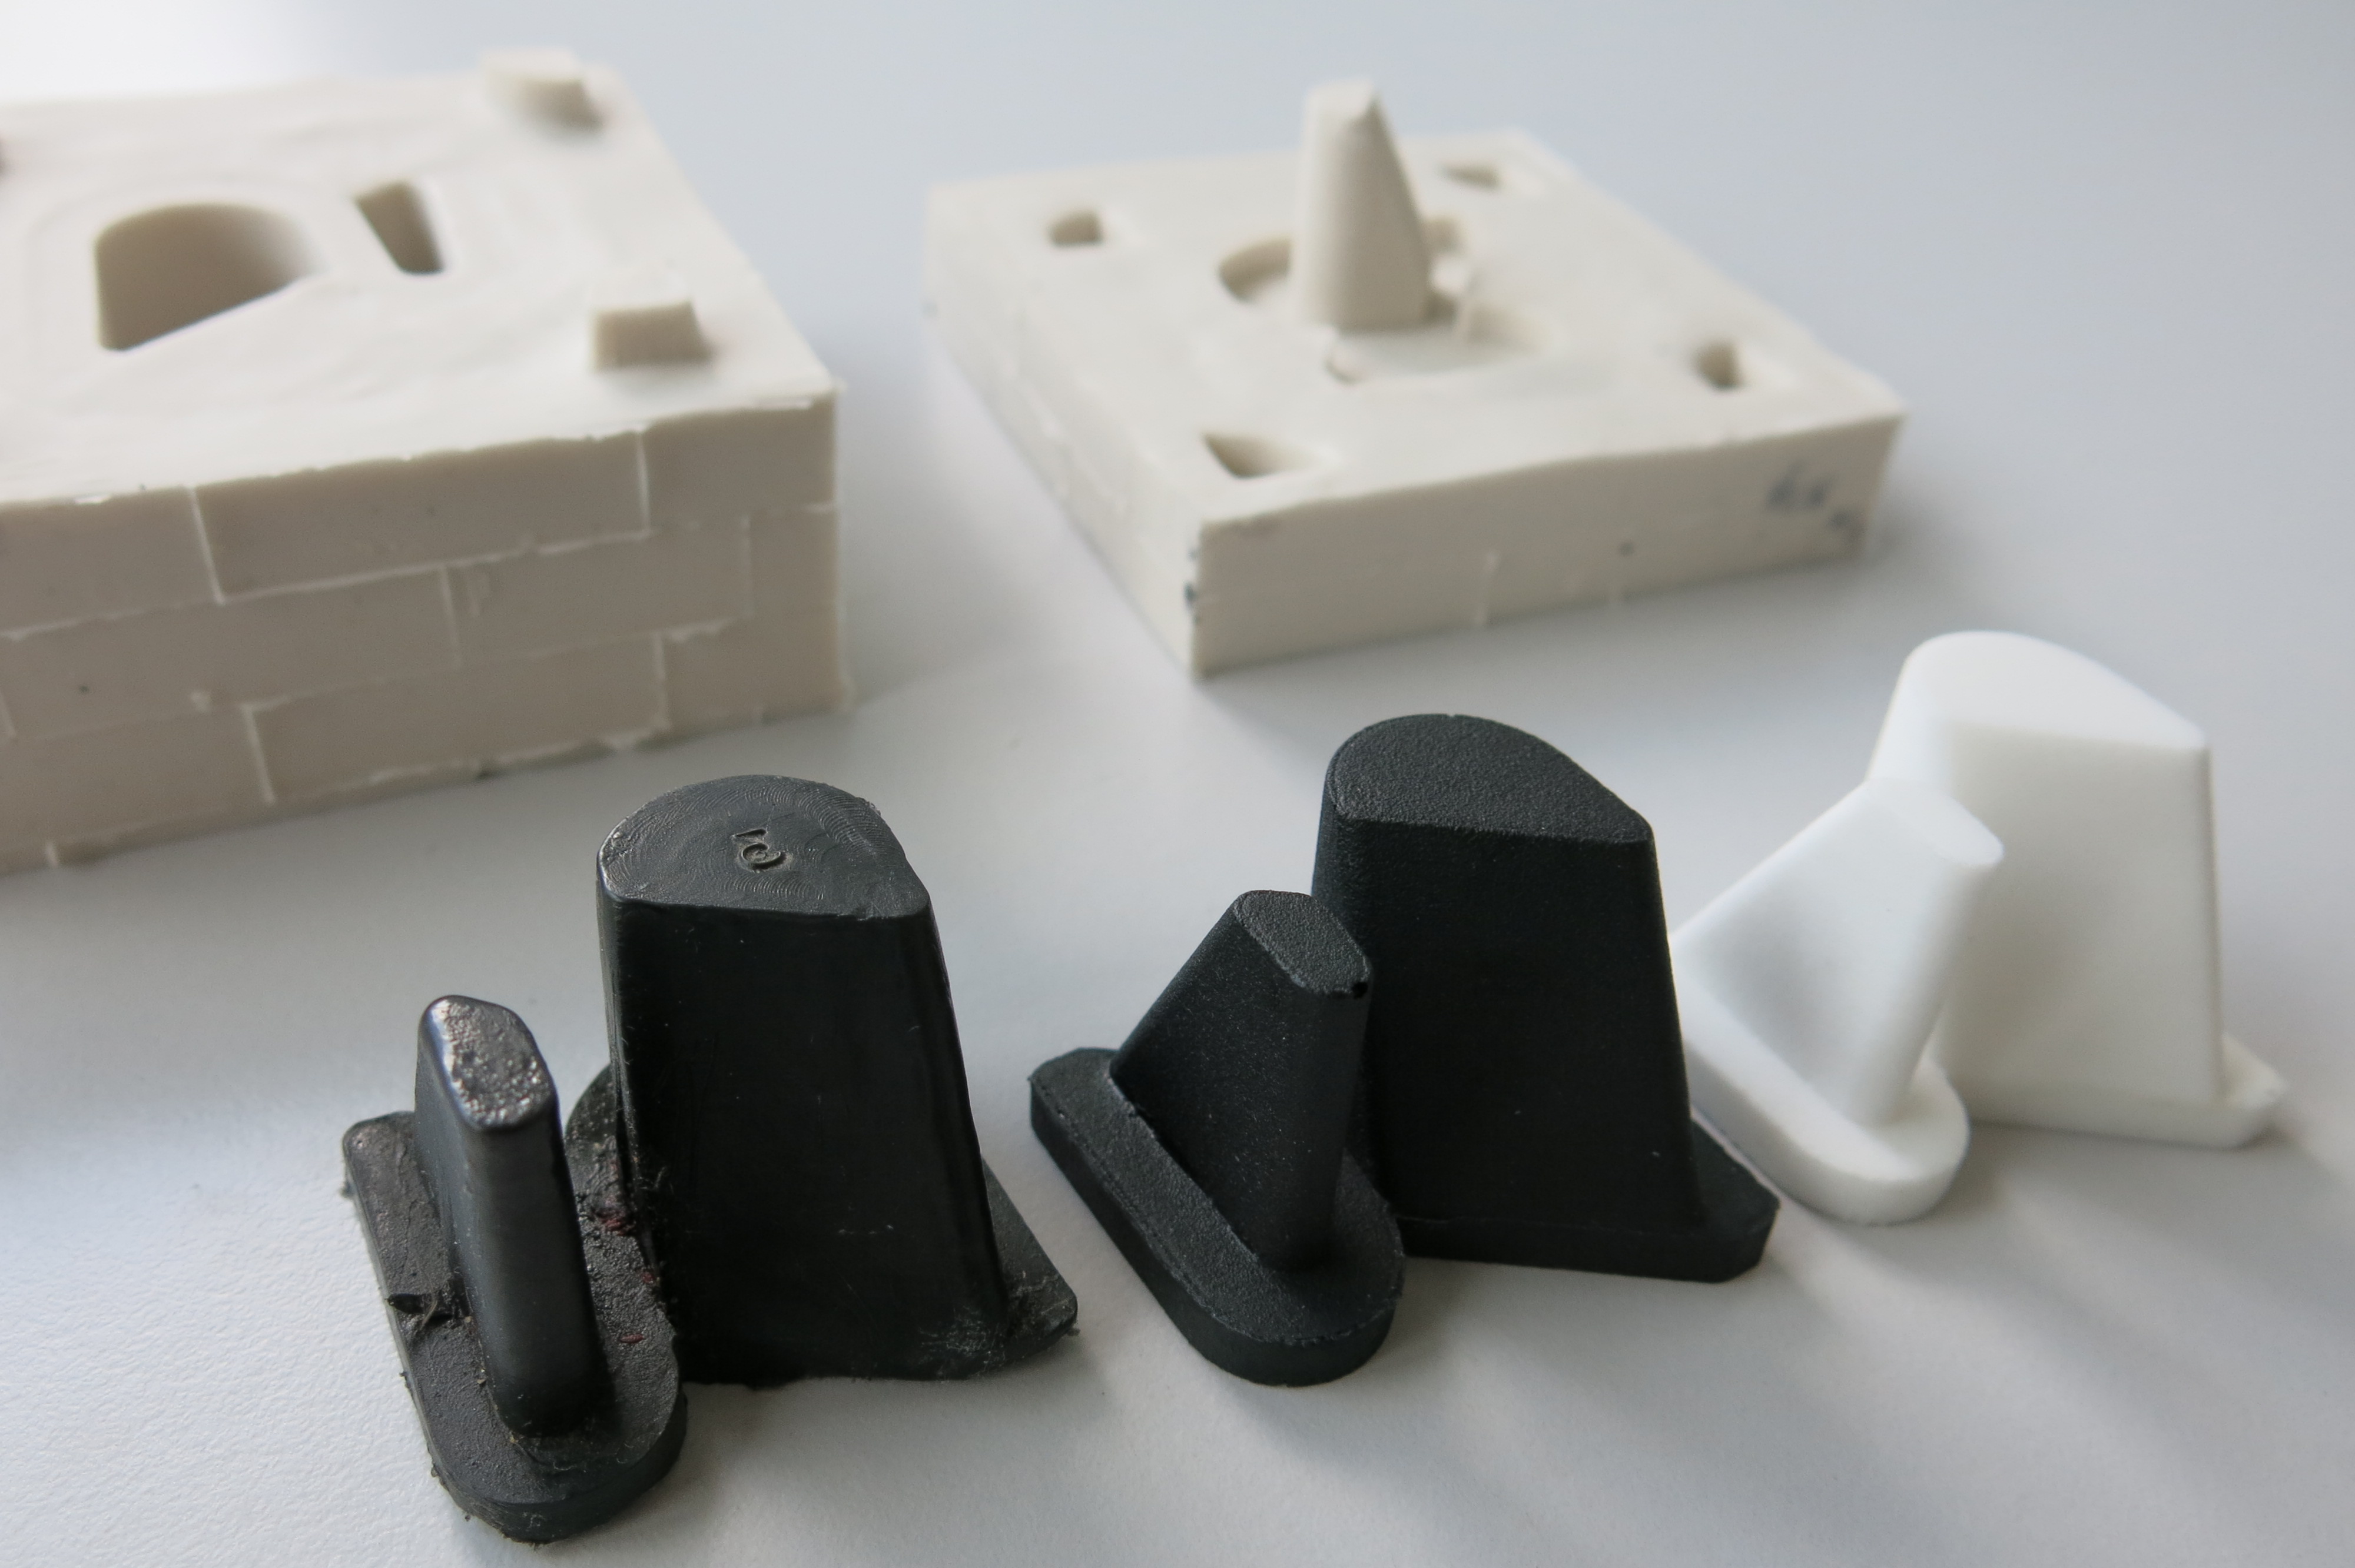 Additive manufacturing to create customized tools with 3D Printing. | Sculpteo Blog